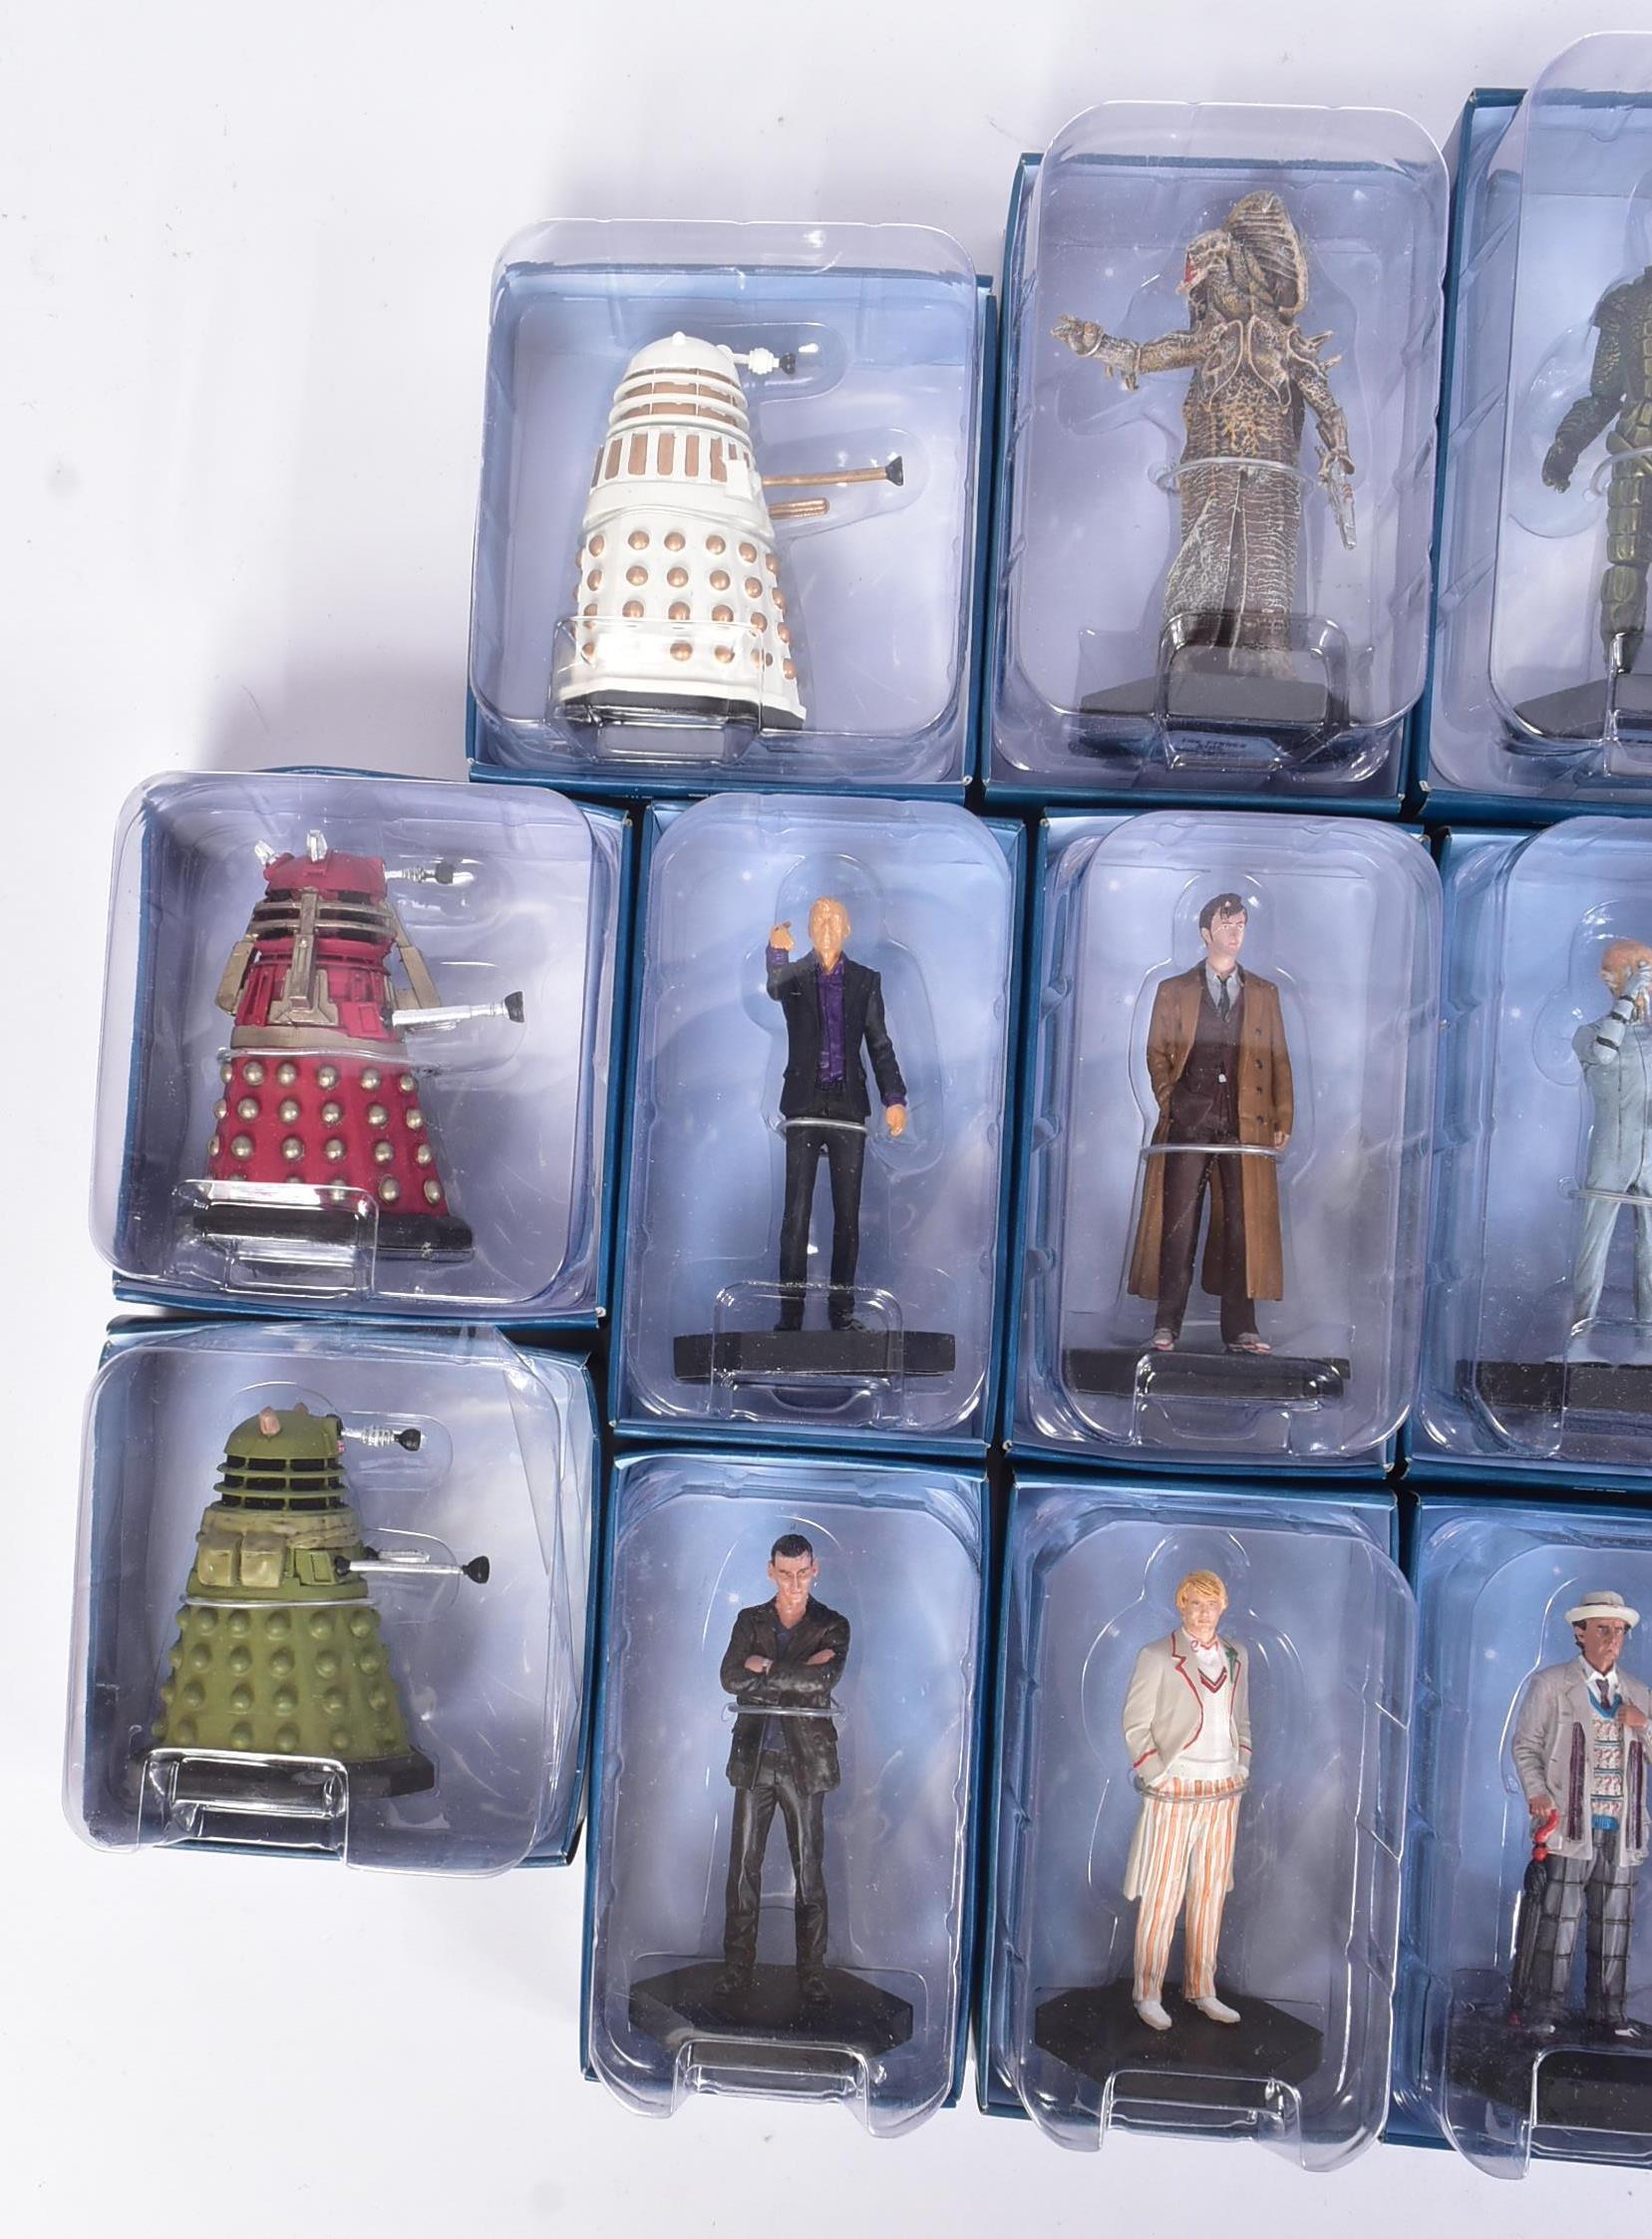 DOCTOR WHO - EAGLEMOSS - RESIN DIECAST FIGURINES - Image 4 of 5